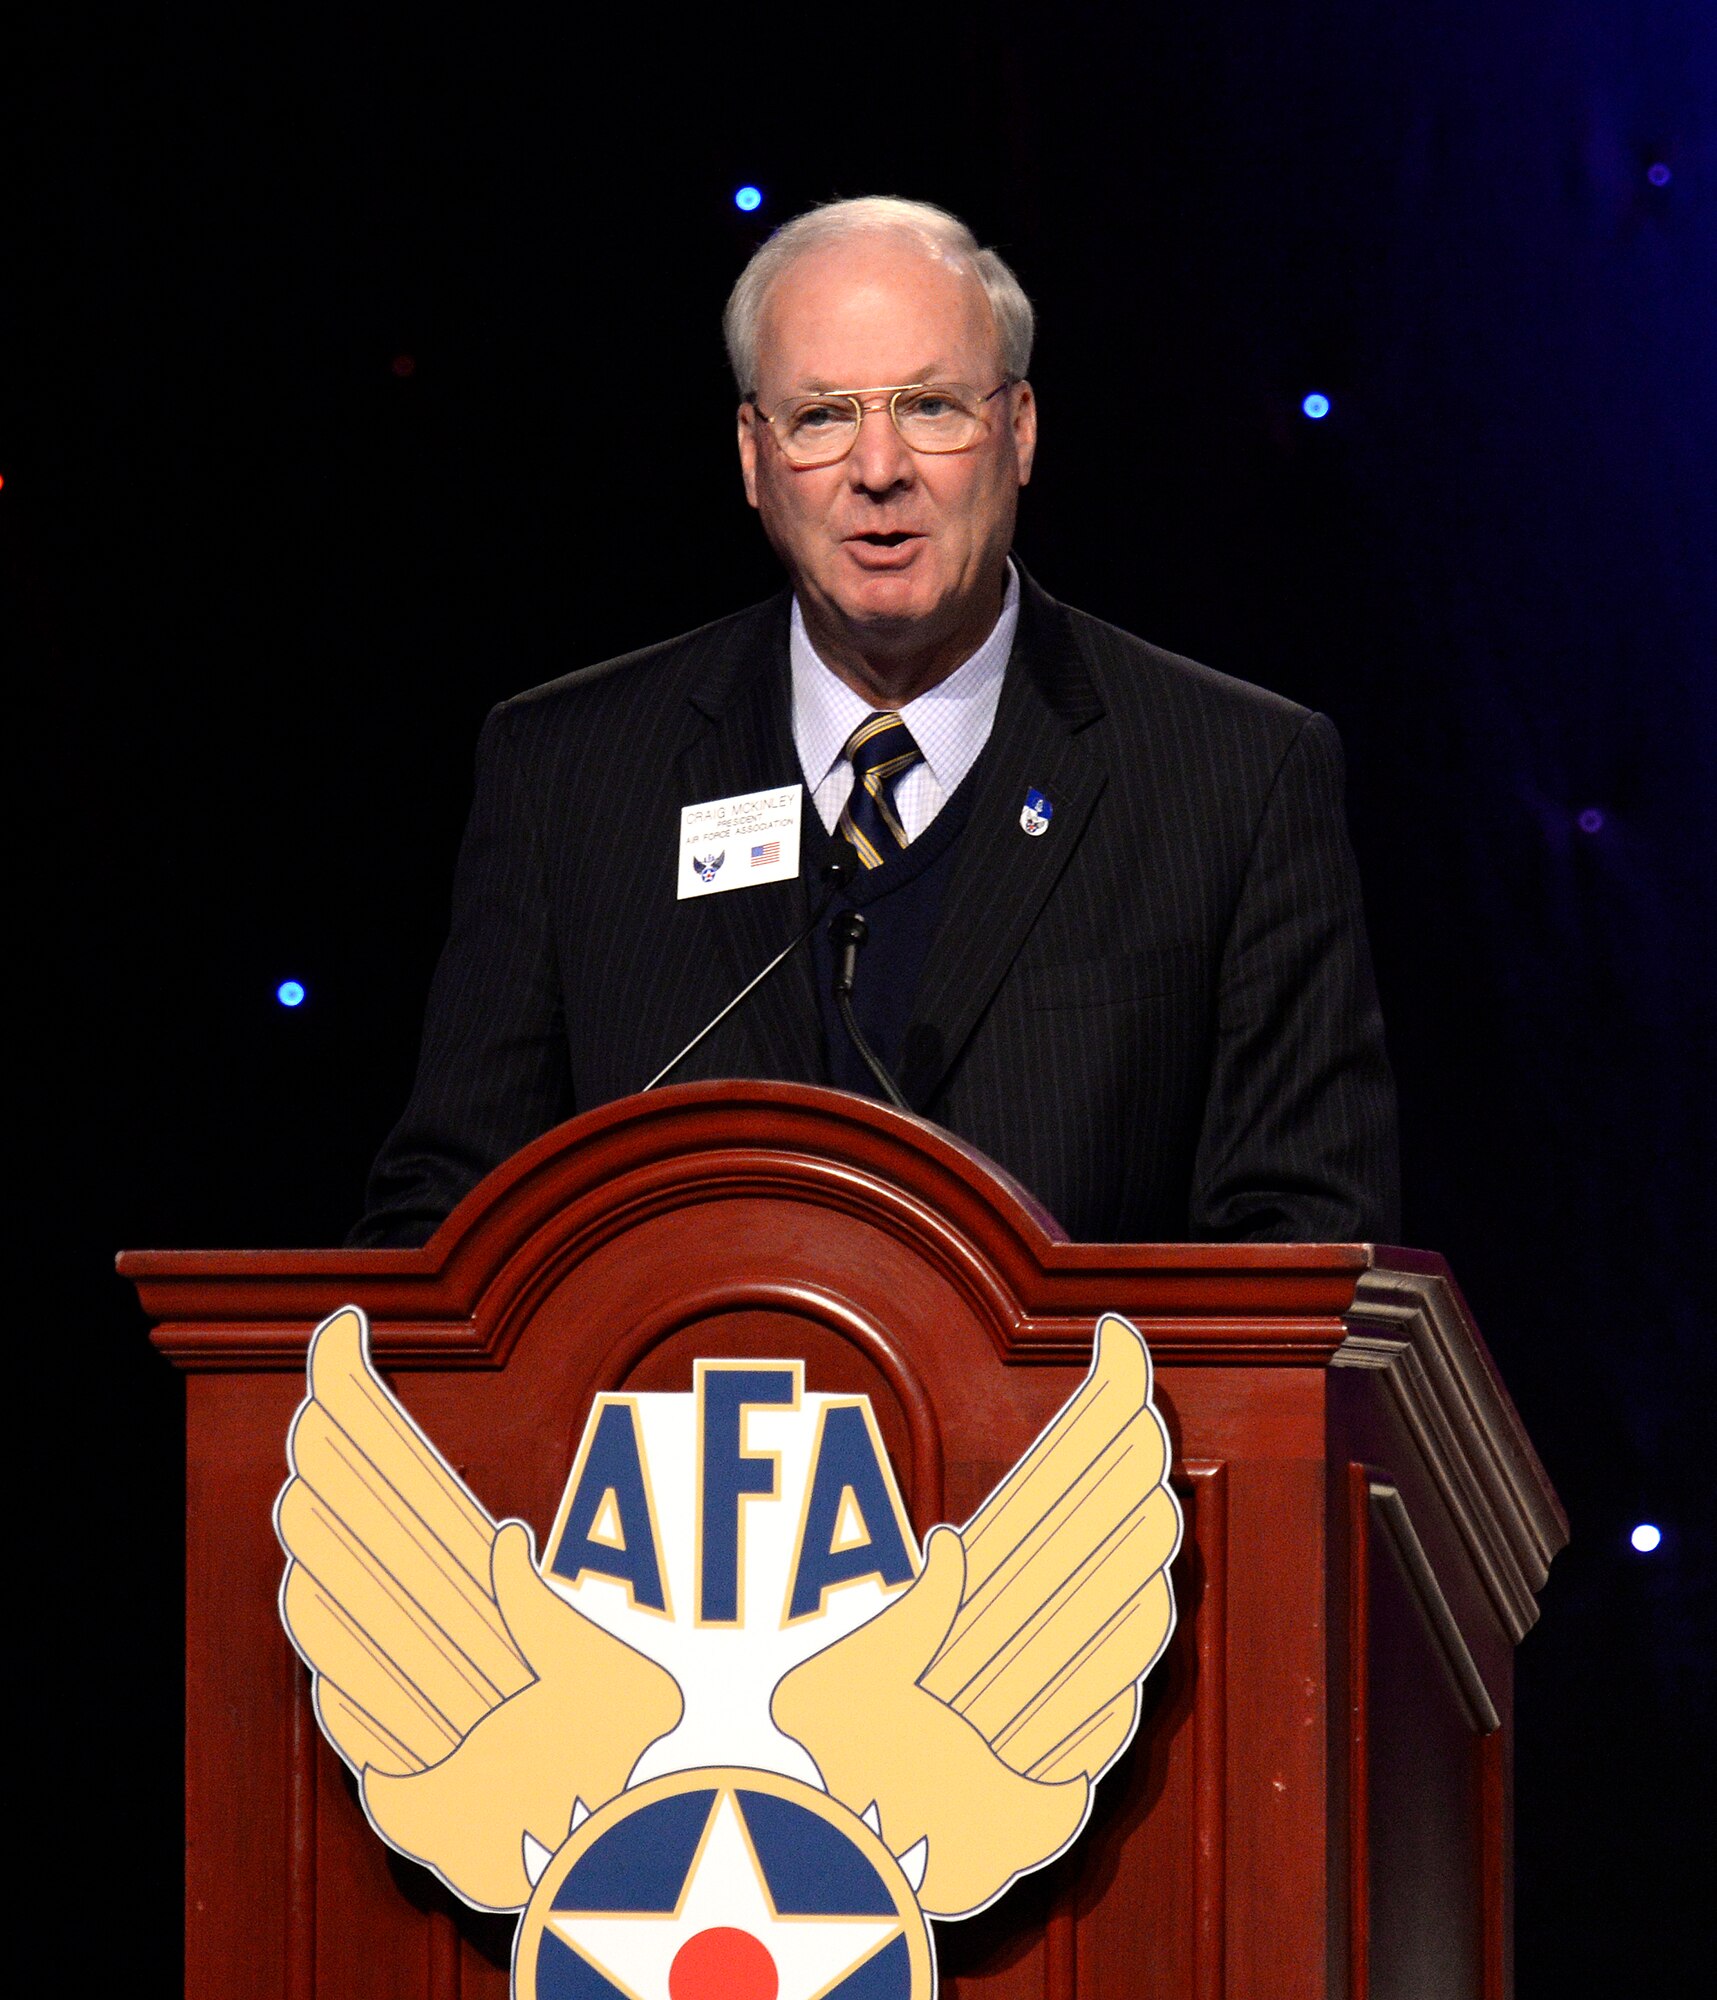 Air Force Association President Craig McKinley speaks at the 2014 Twelve Outstanding Airmen of the Year reception and awards dinner that was part of this year's Air Force Association Air & Space Conference and Technology Exposition Sept. 15, 2014 in Washington, D.C.  (U.S. Air Force photo/Andy Morataya)